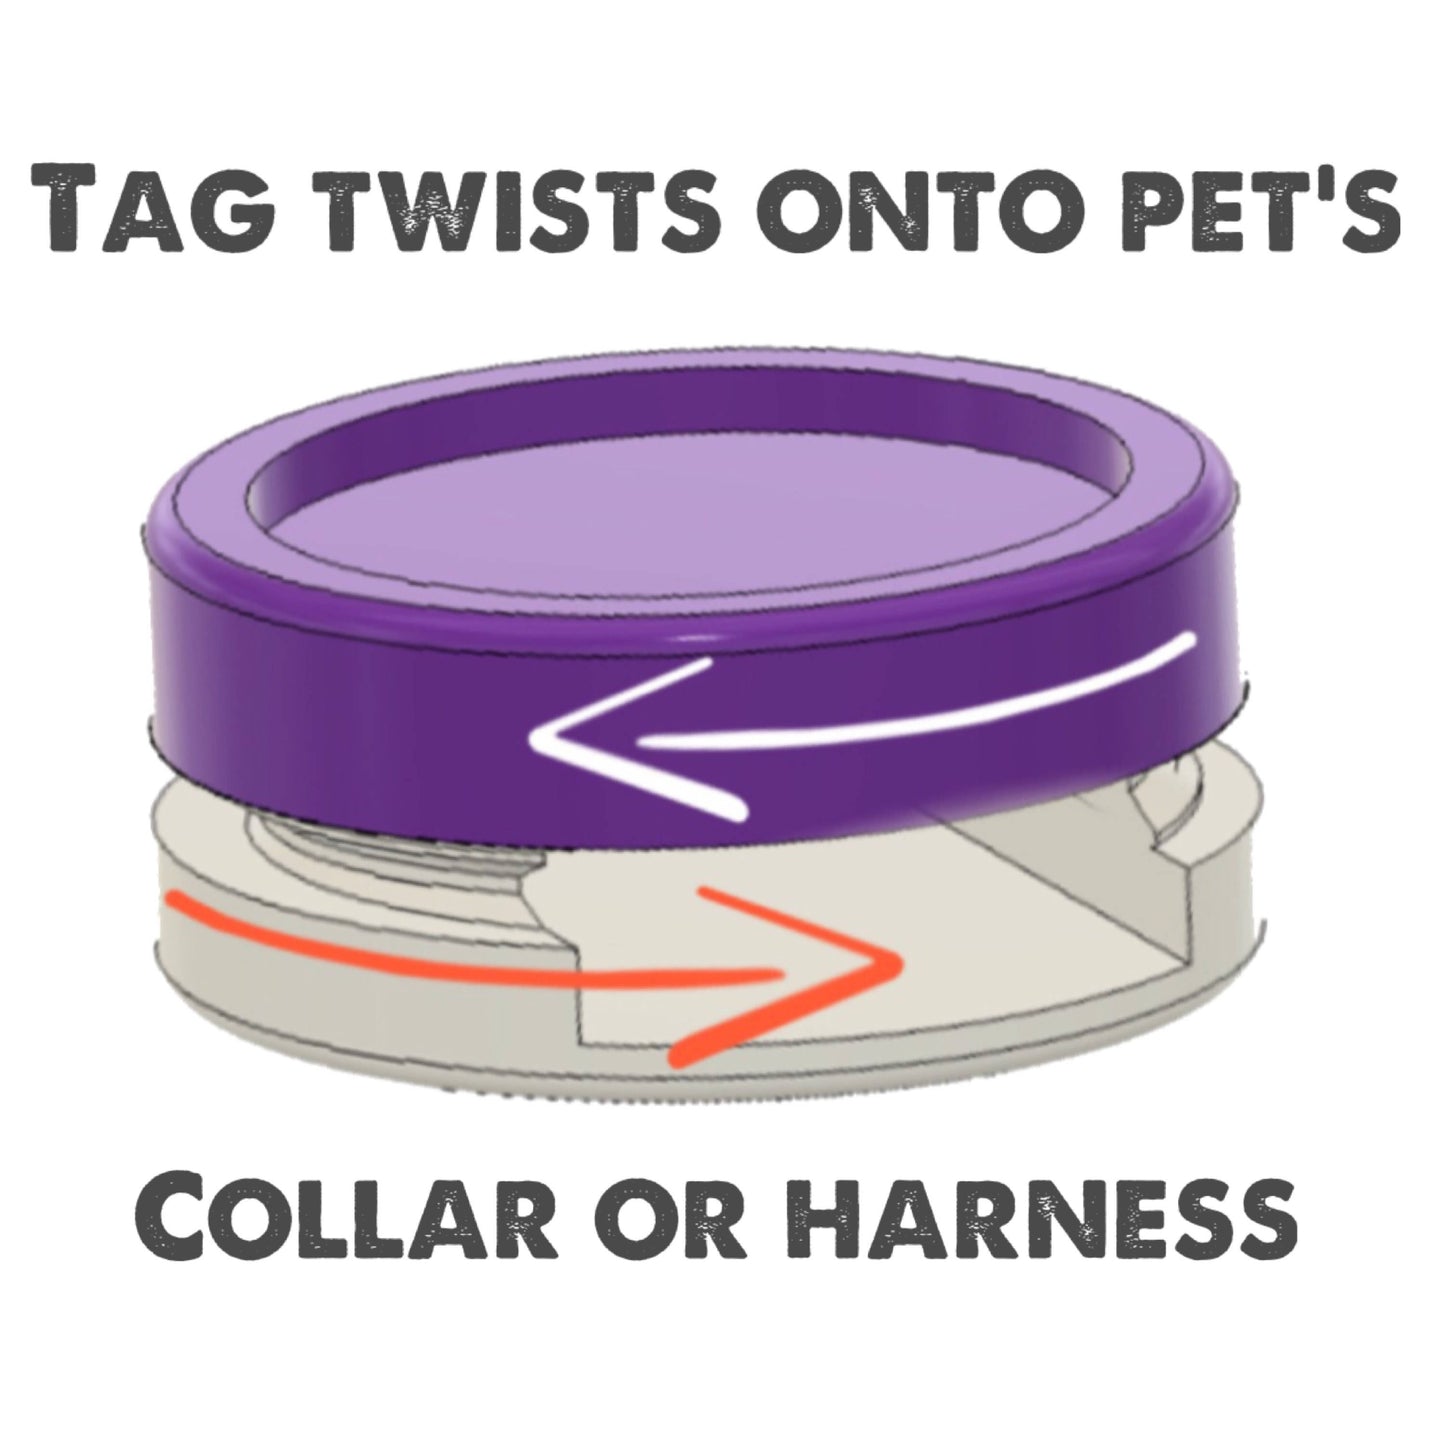 Mardi Gras King Cake Silent, Eco-Friendly, Ringless ID Tag for Cats and Dogs